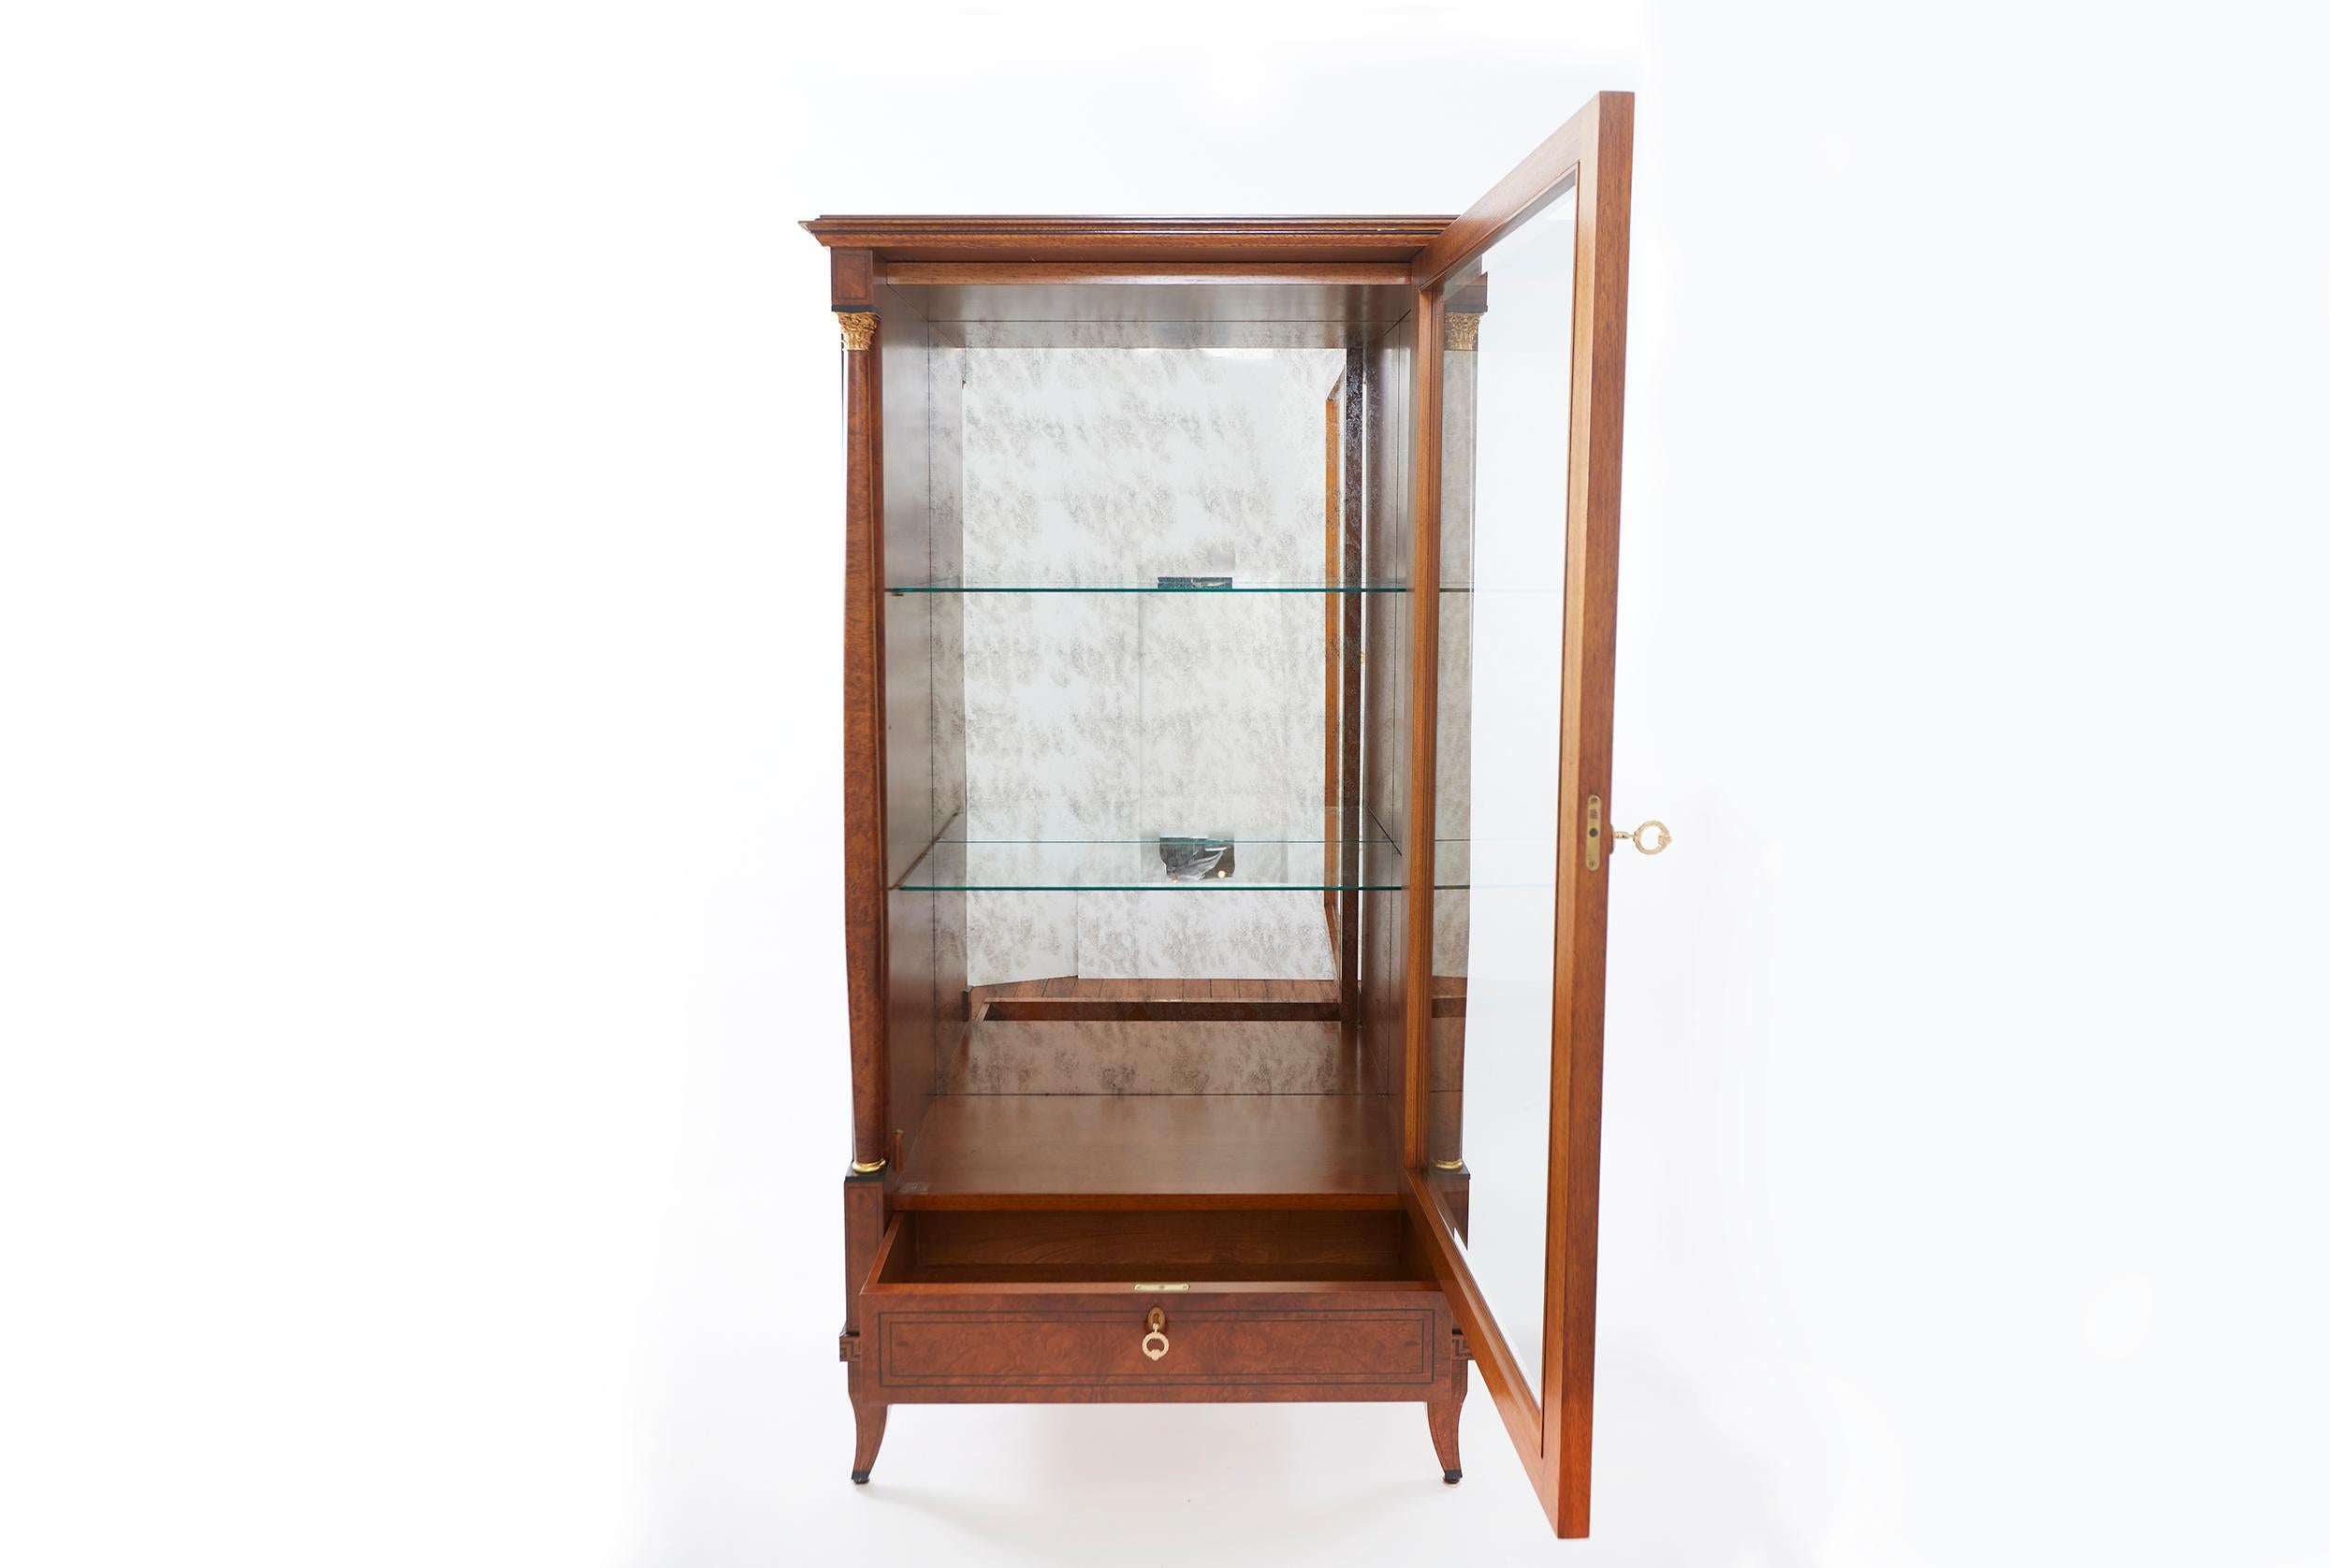 antique display cabinets with glass doors